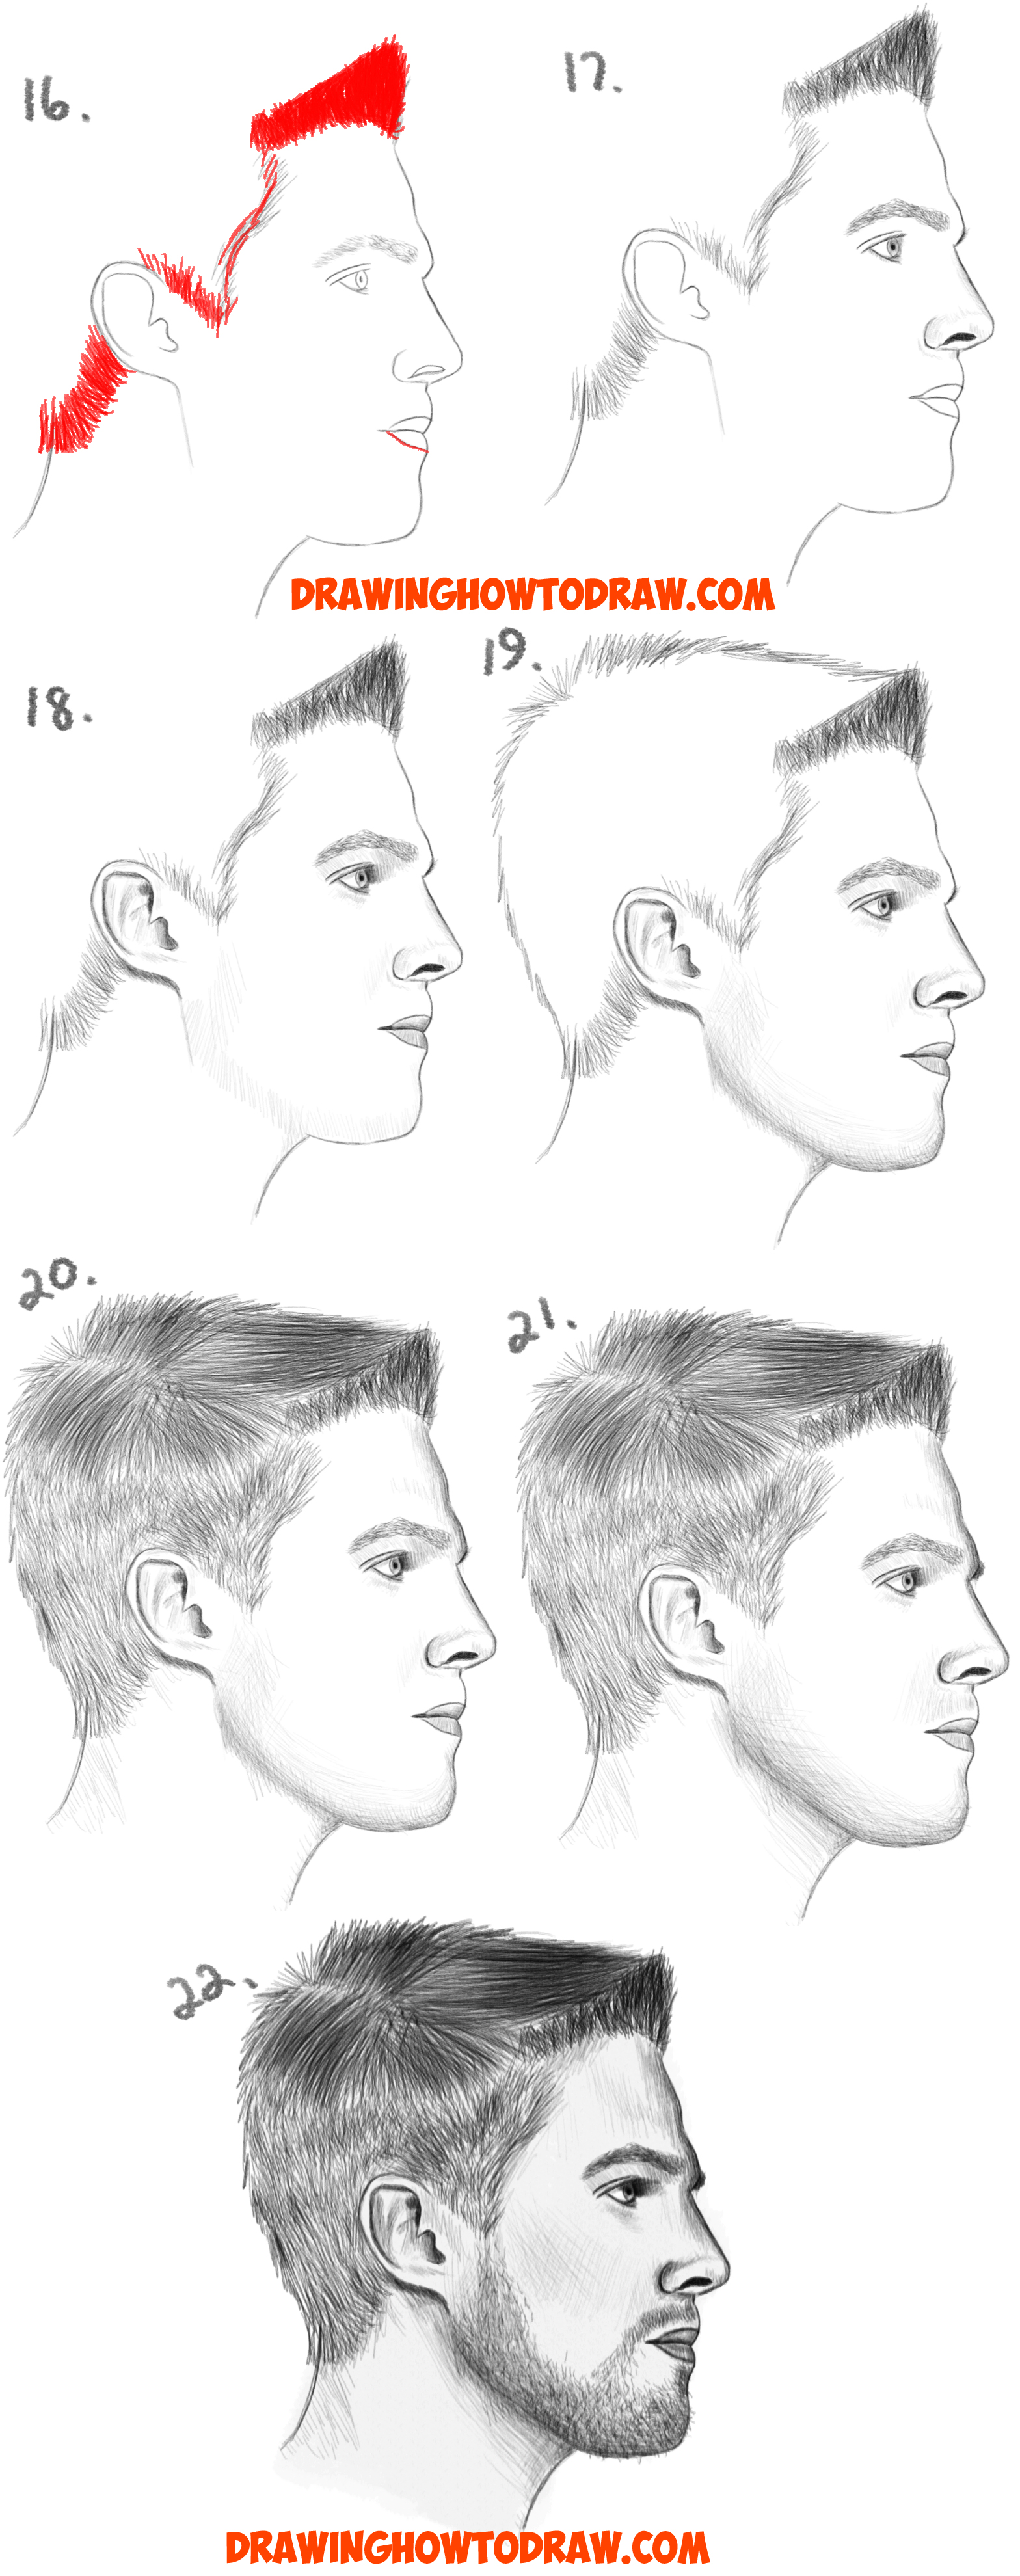 How to Draw a Face from the Side Profile View (Male / Man) Easy Step by